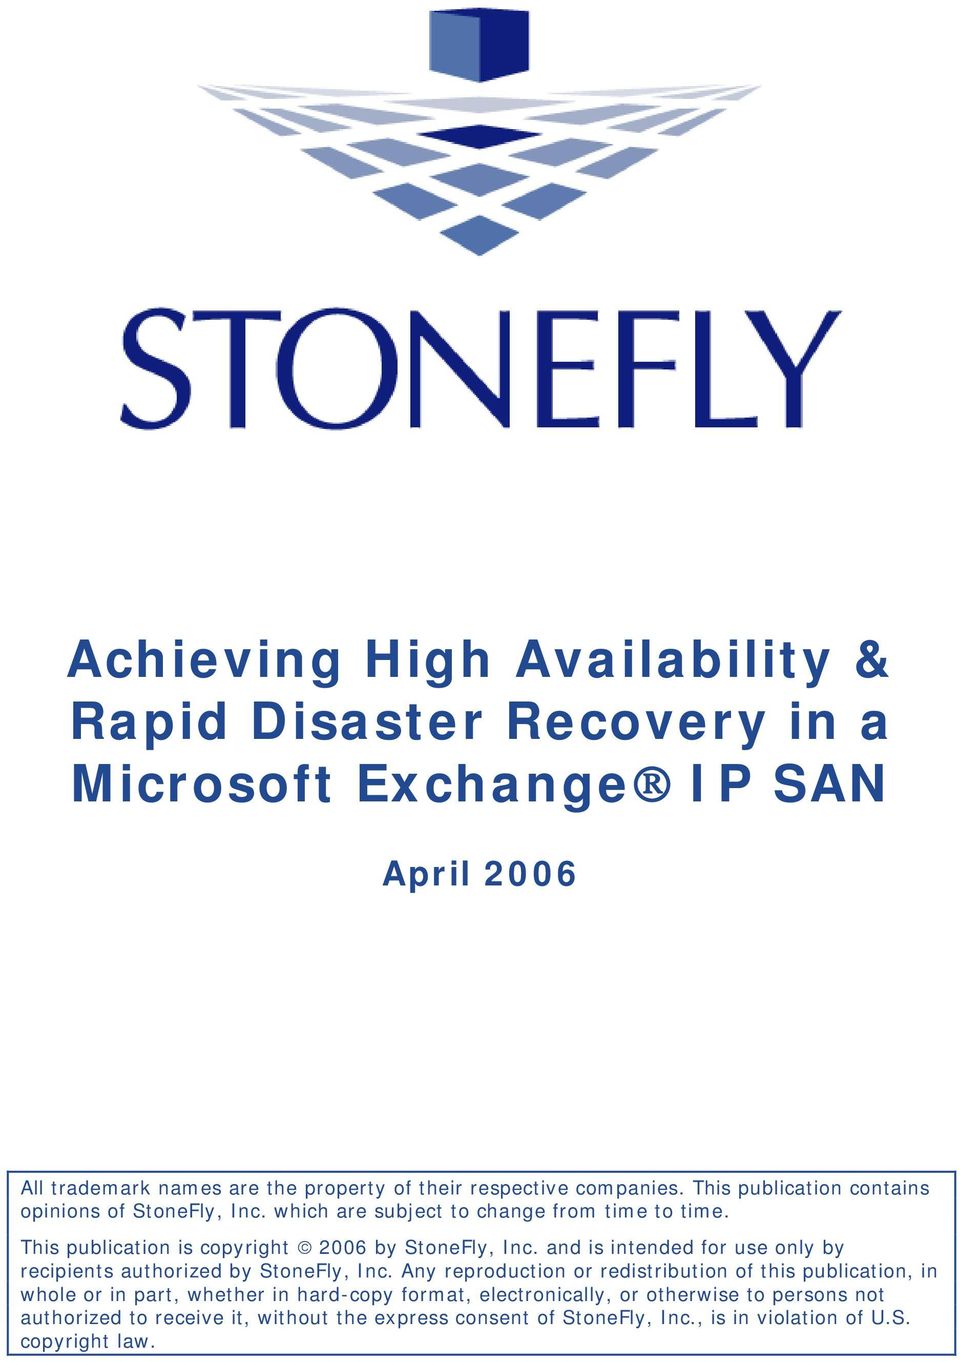 and is intended for use only by recipients authorized by StoneFly, Inc.